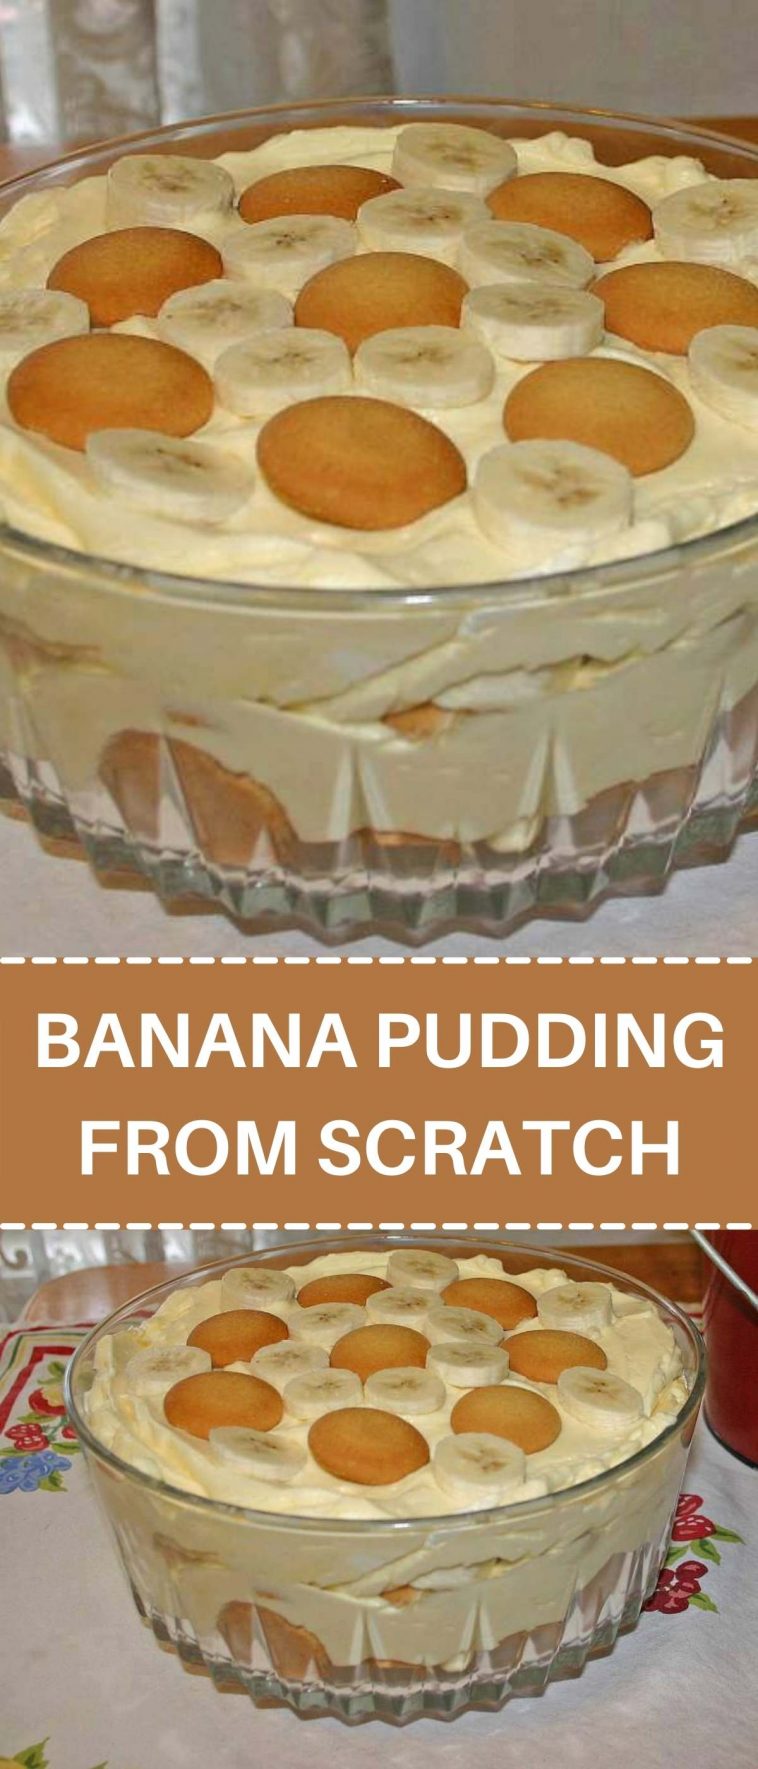 BANANA PUDDING FROM SCRATCH